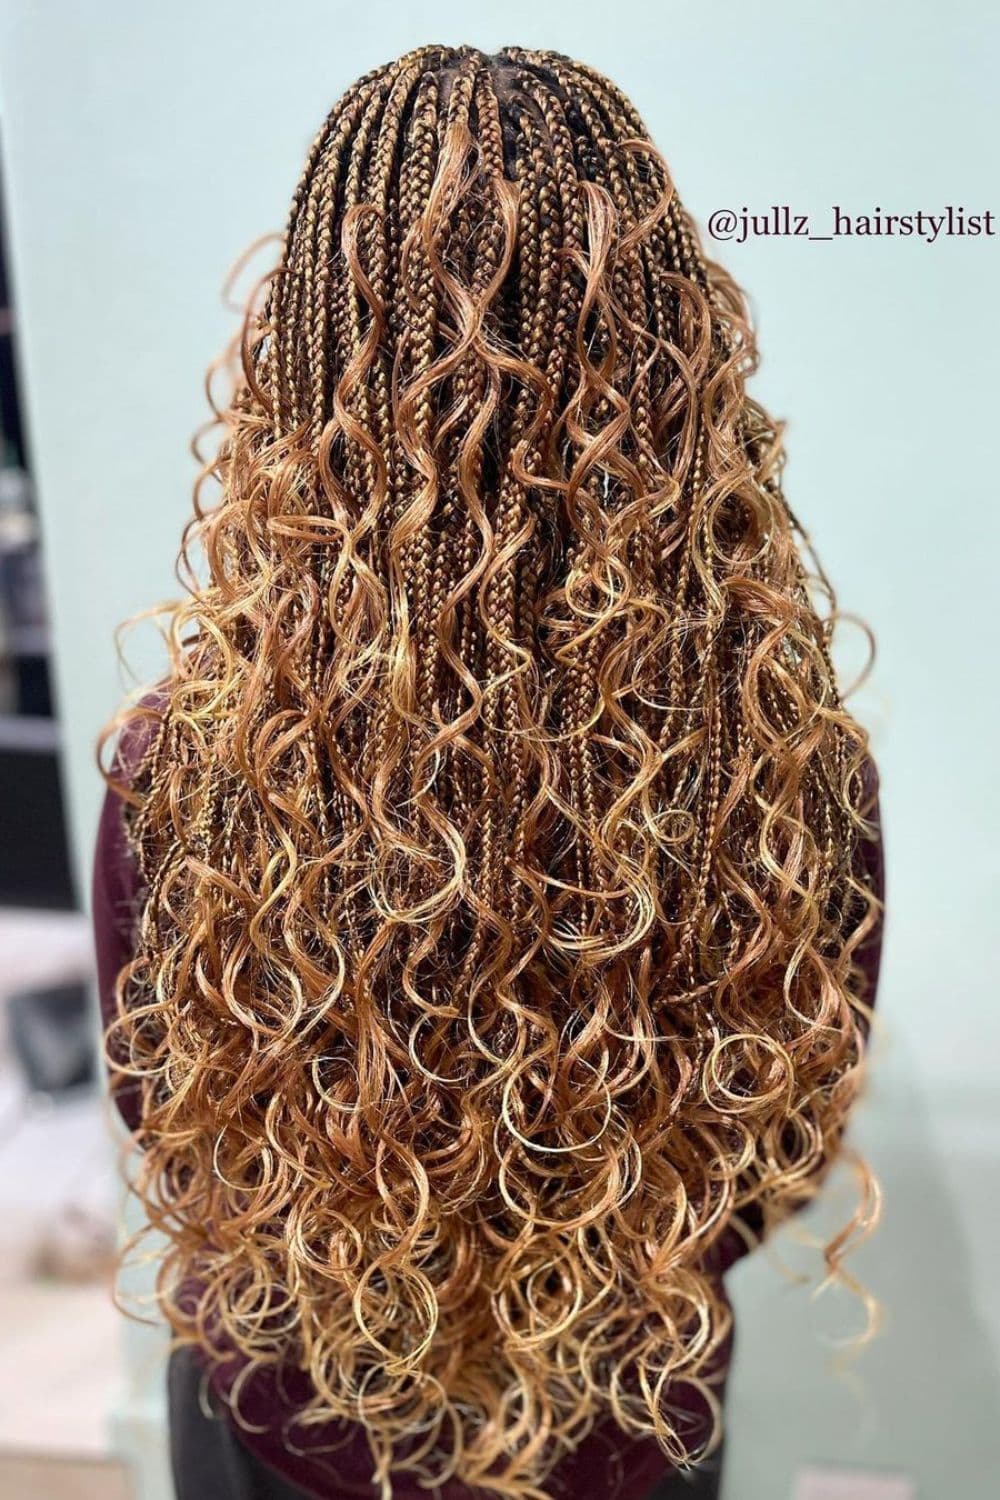 A woman with brown and blonde goddess braids with big curls.